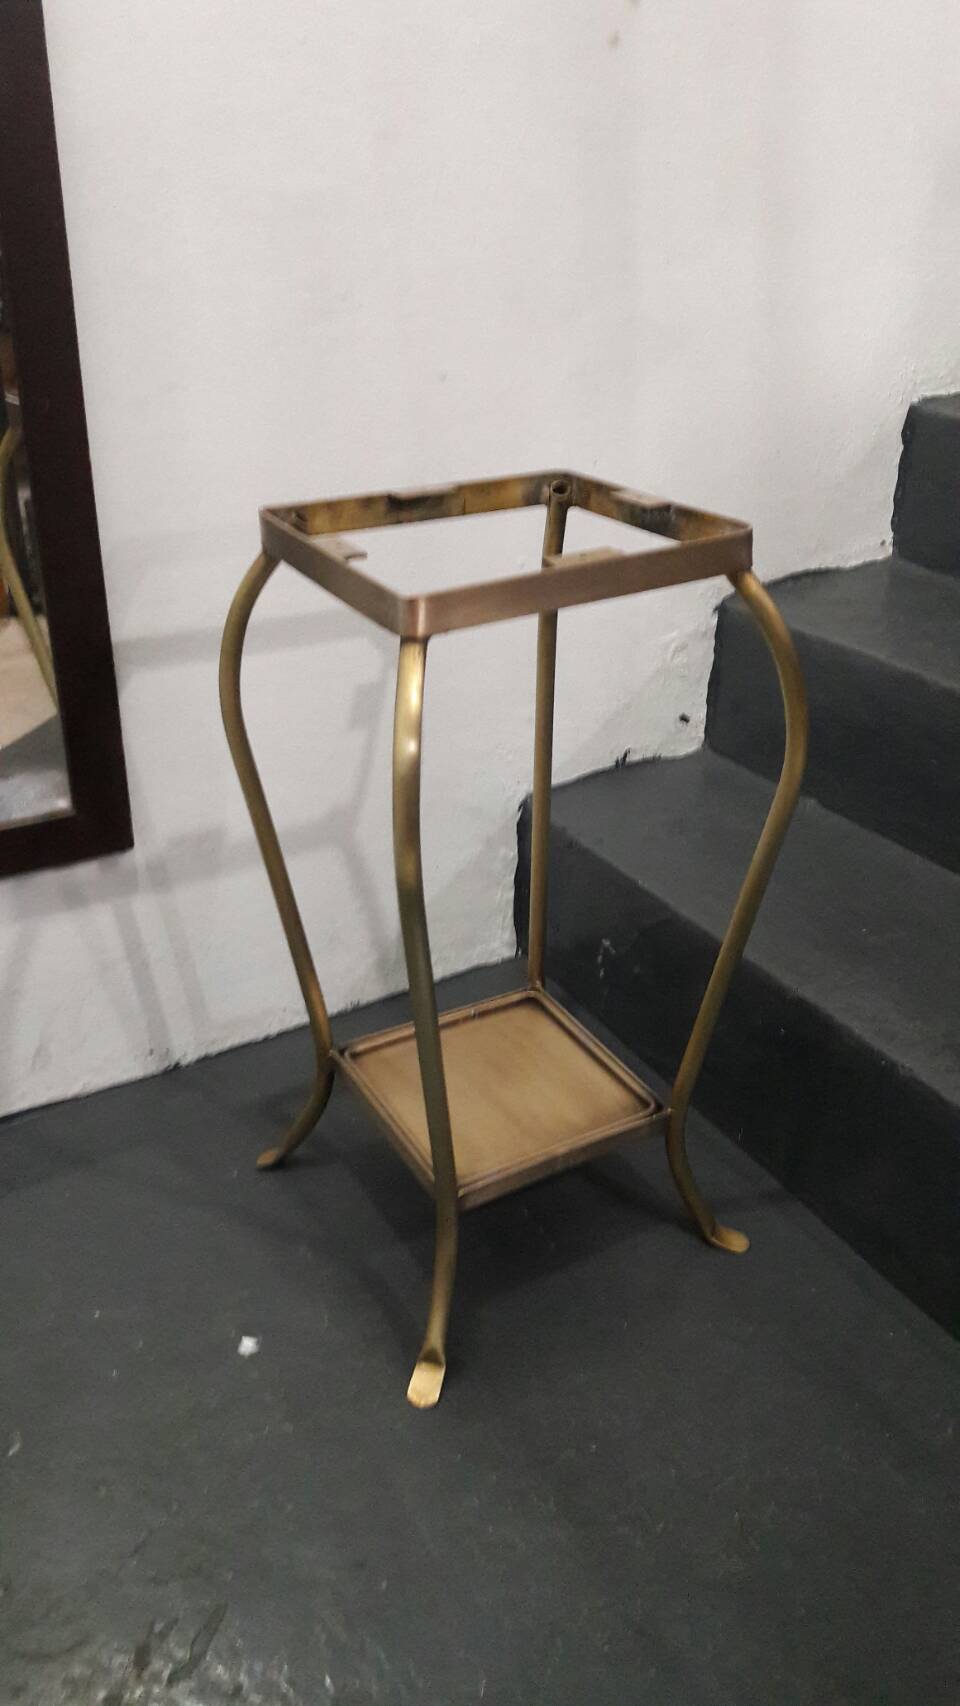 Brass stand for show item